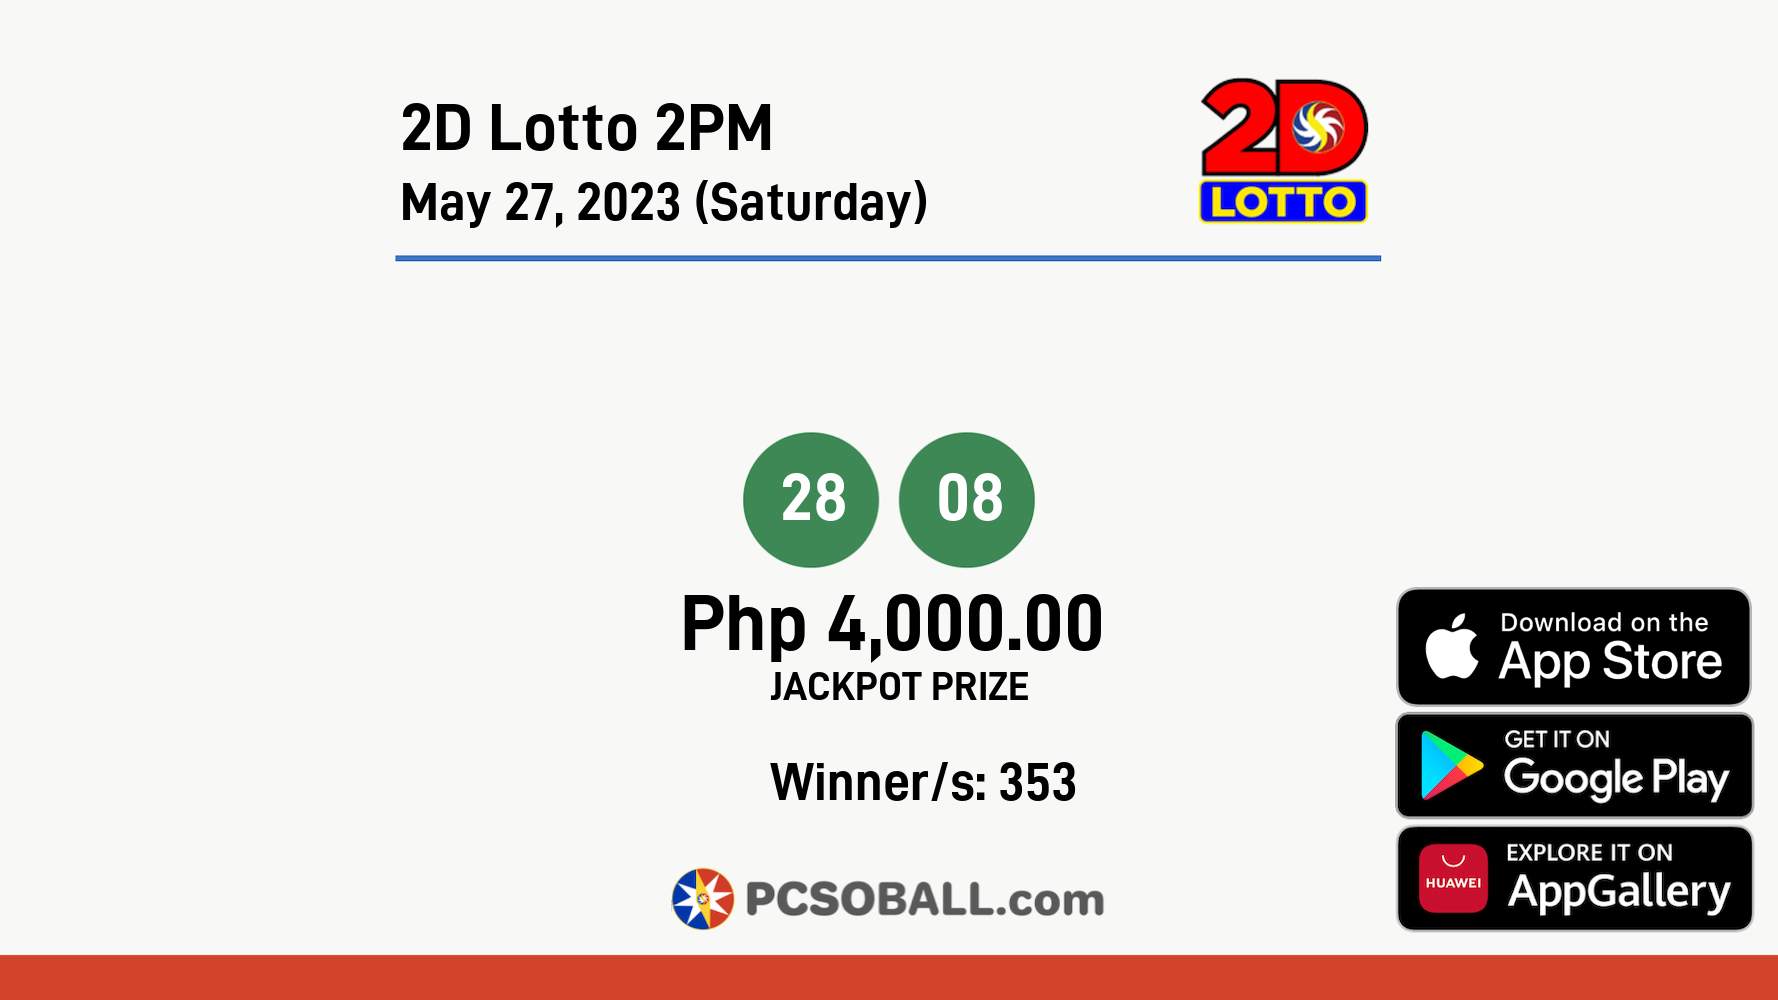 2D Lotto 2PM May 27, 2023 (Saturday) Result